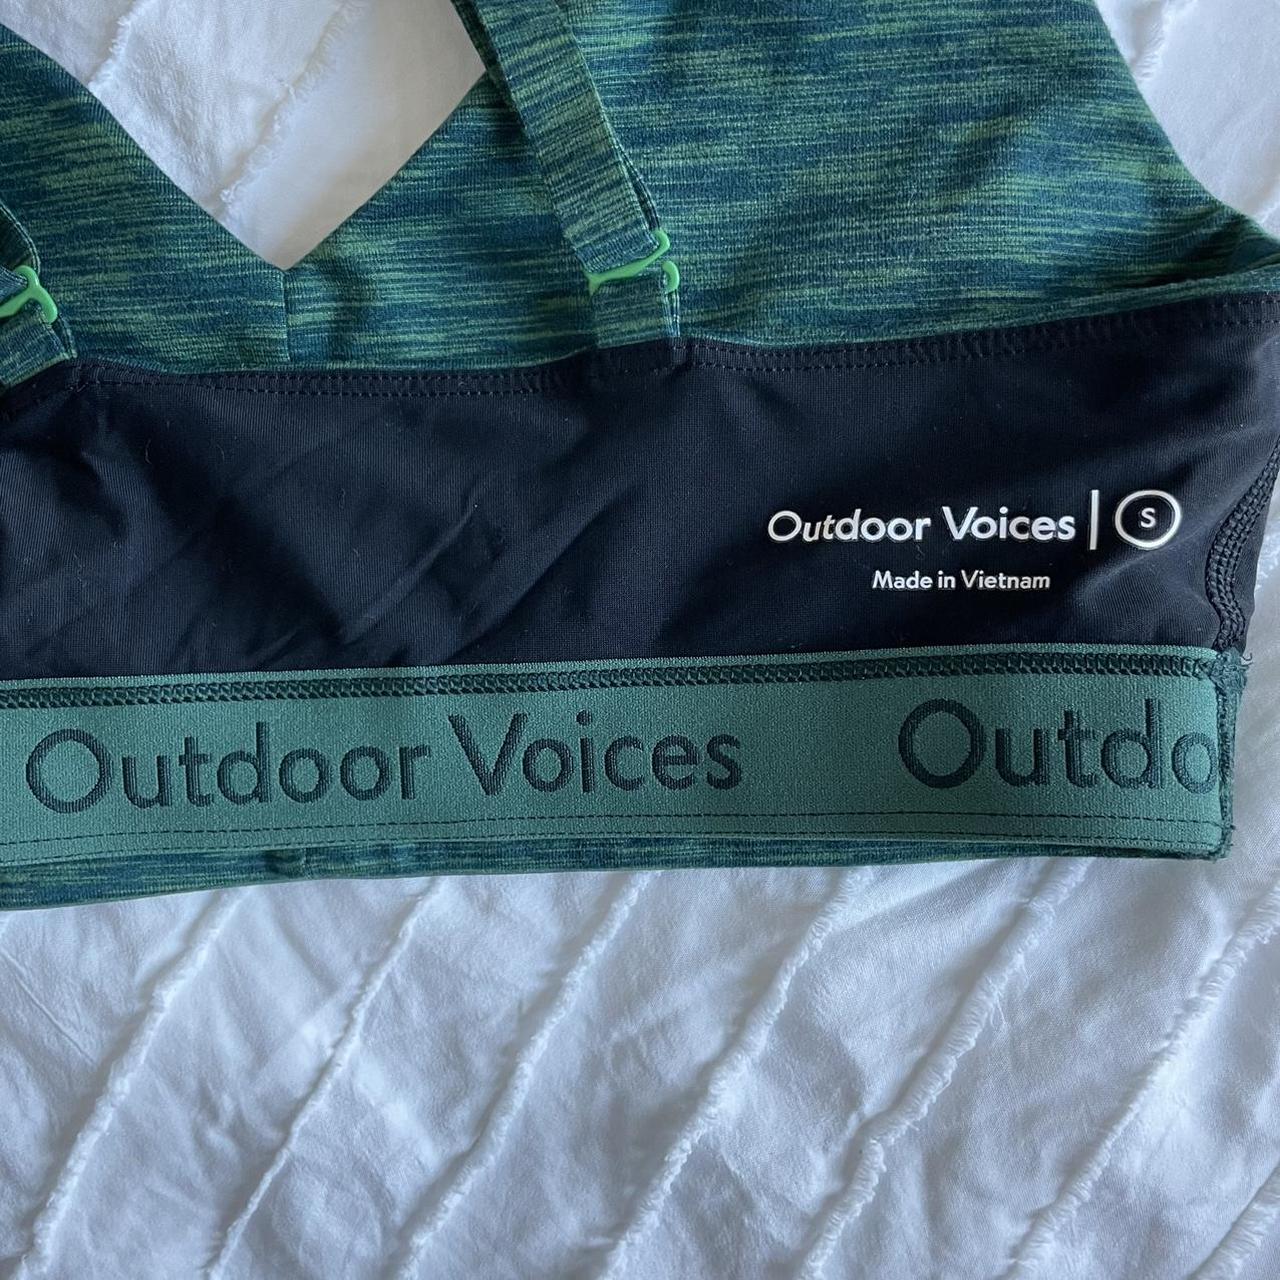 Product Image 3 - Outdoor Voices Sports Bra

Size: Small